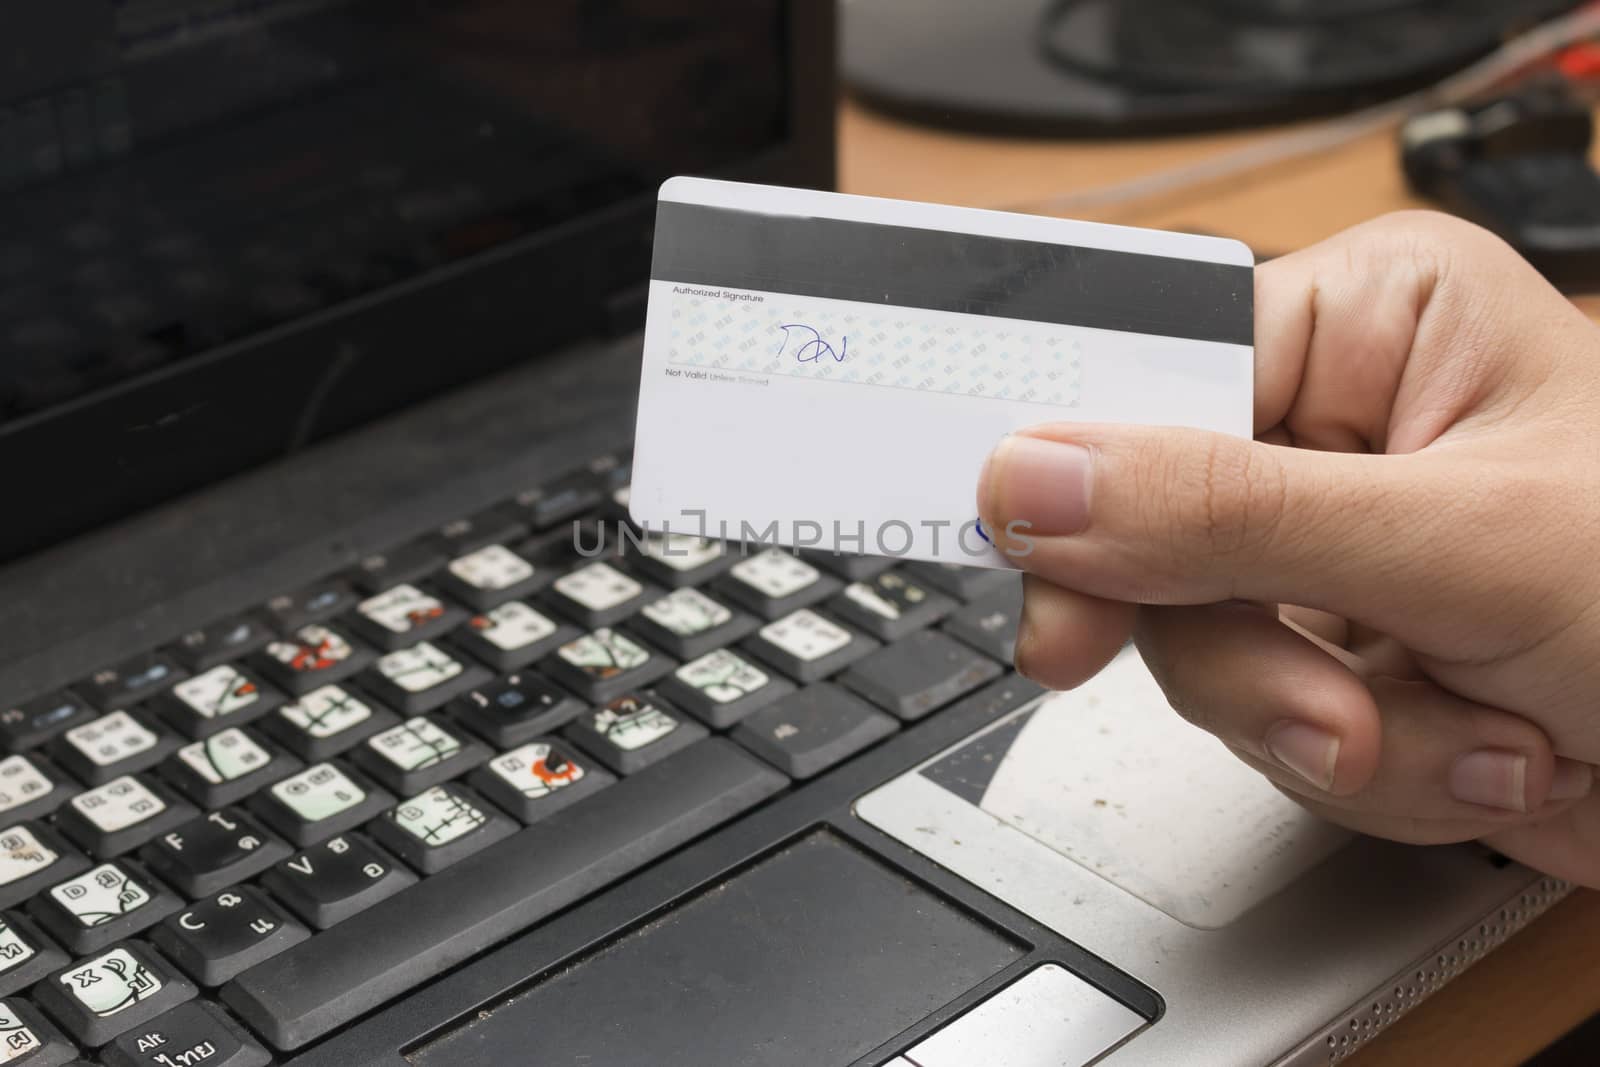 Hands holding credit card and using laptop. Online shopping,Game online